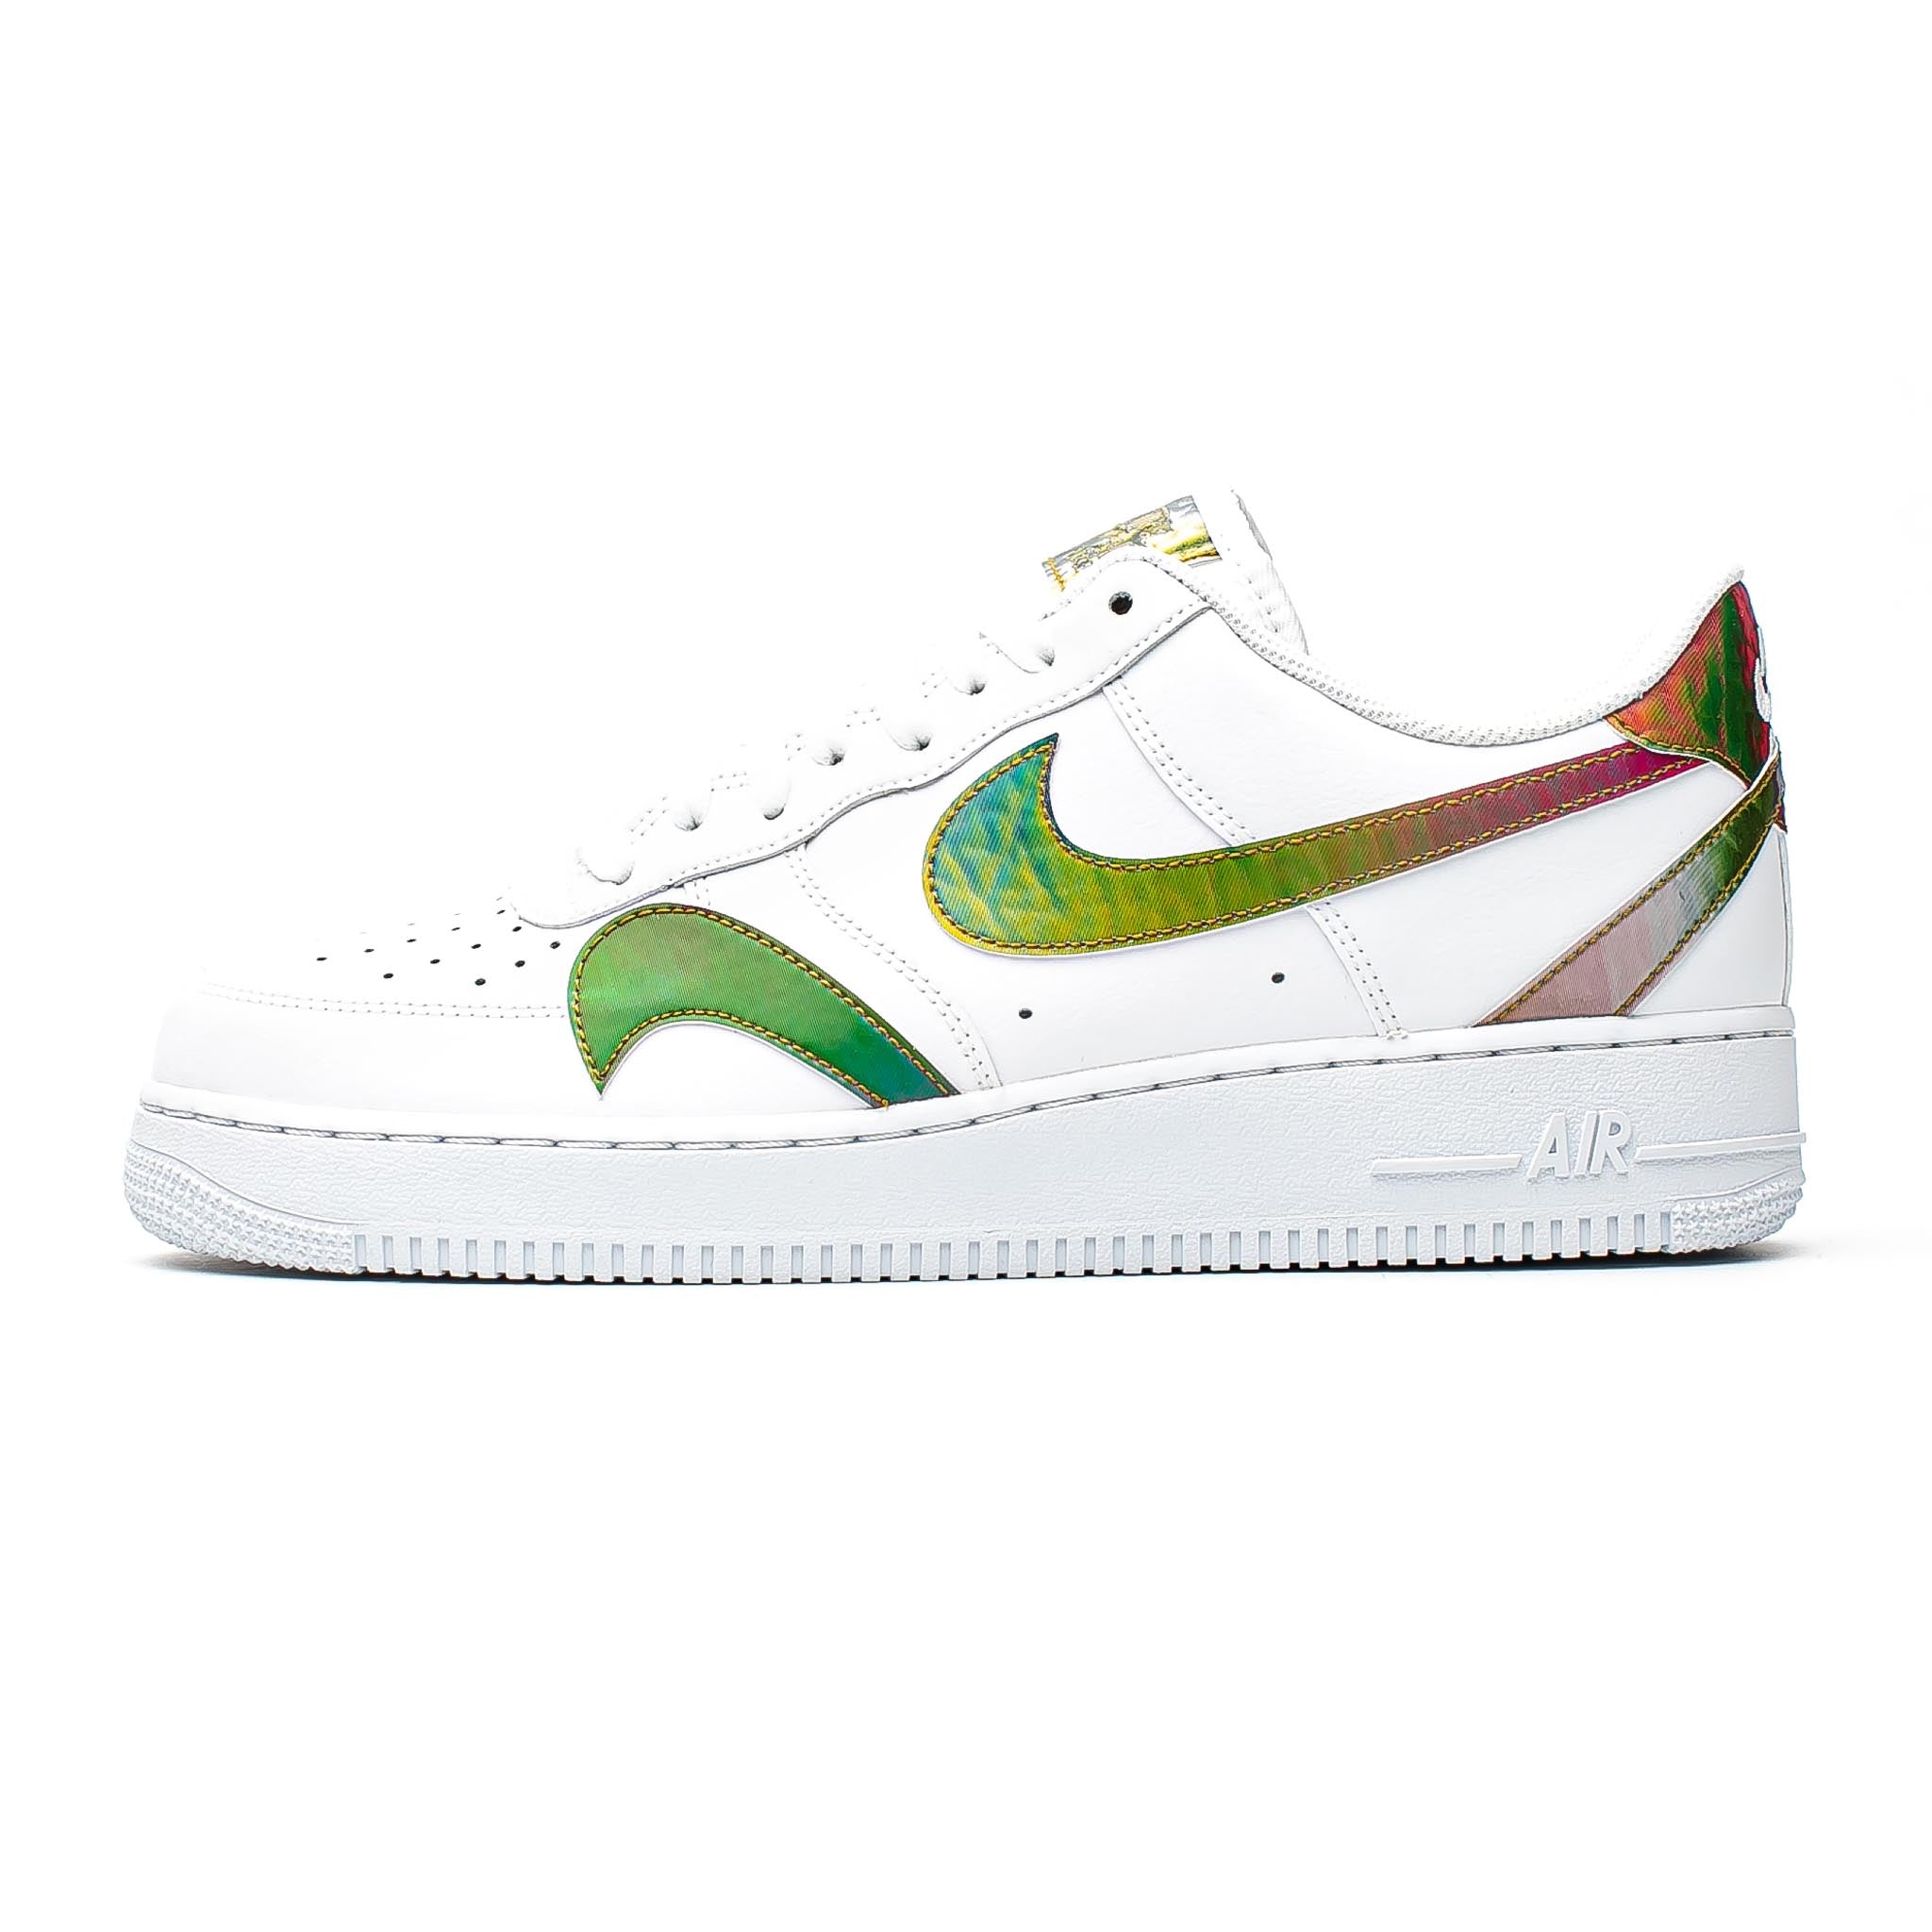 Nike Air Force 1 '07 LV8 2 'Misplaced Swooshes' White/Multi-Color